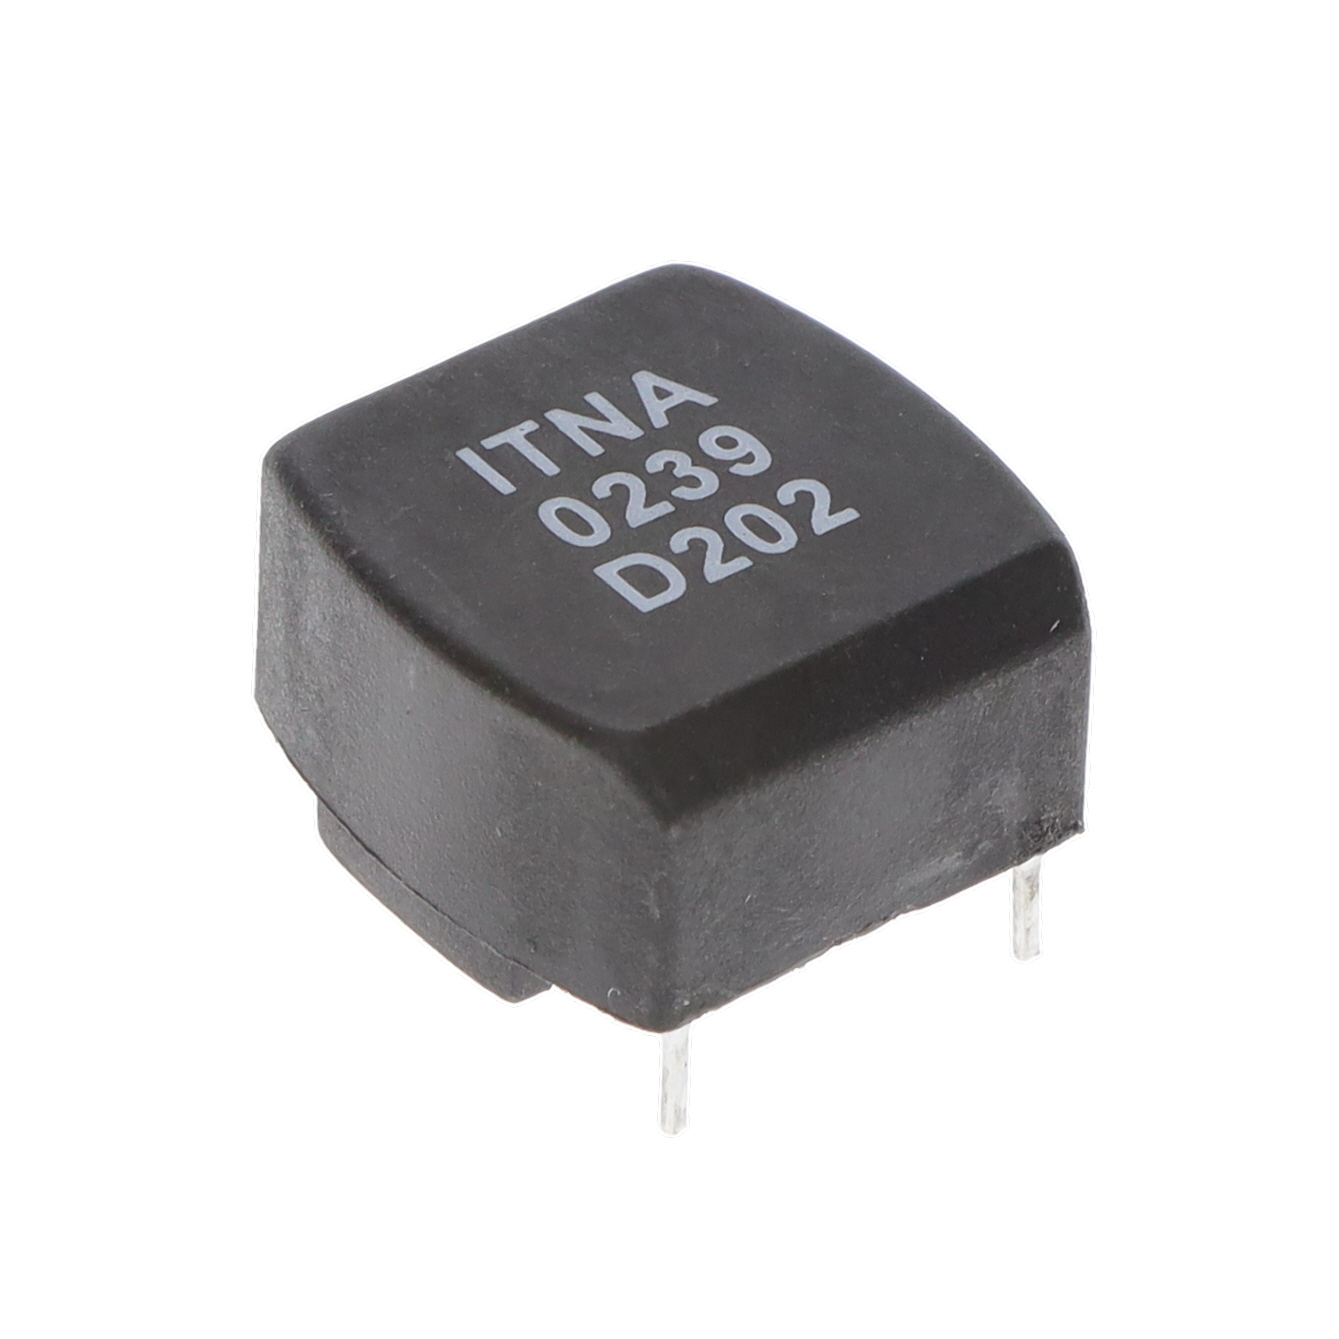 the part number is ITNA-0239-D202